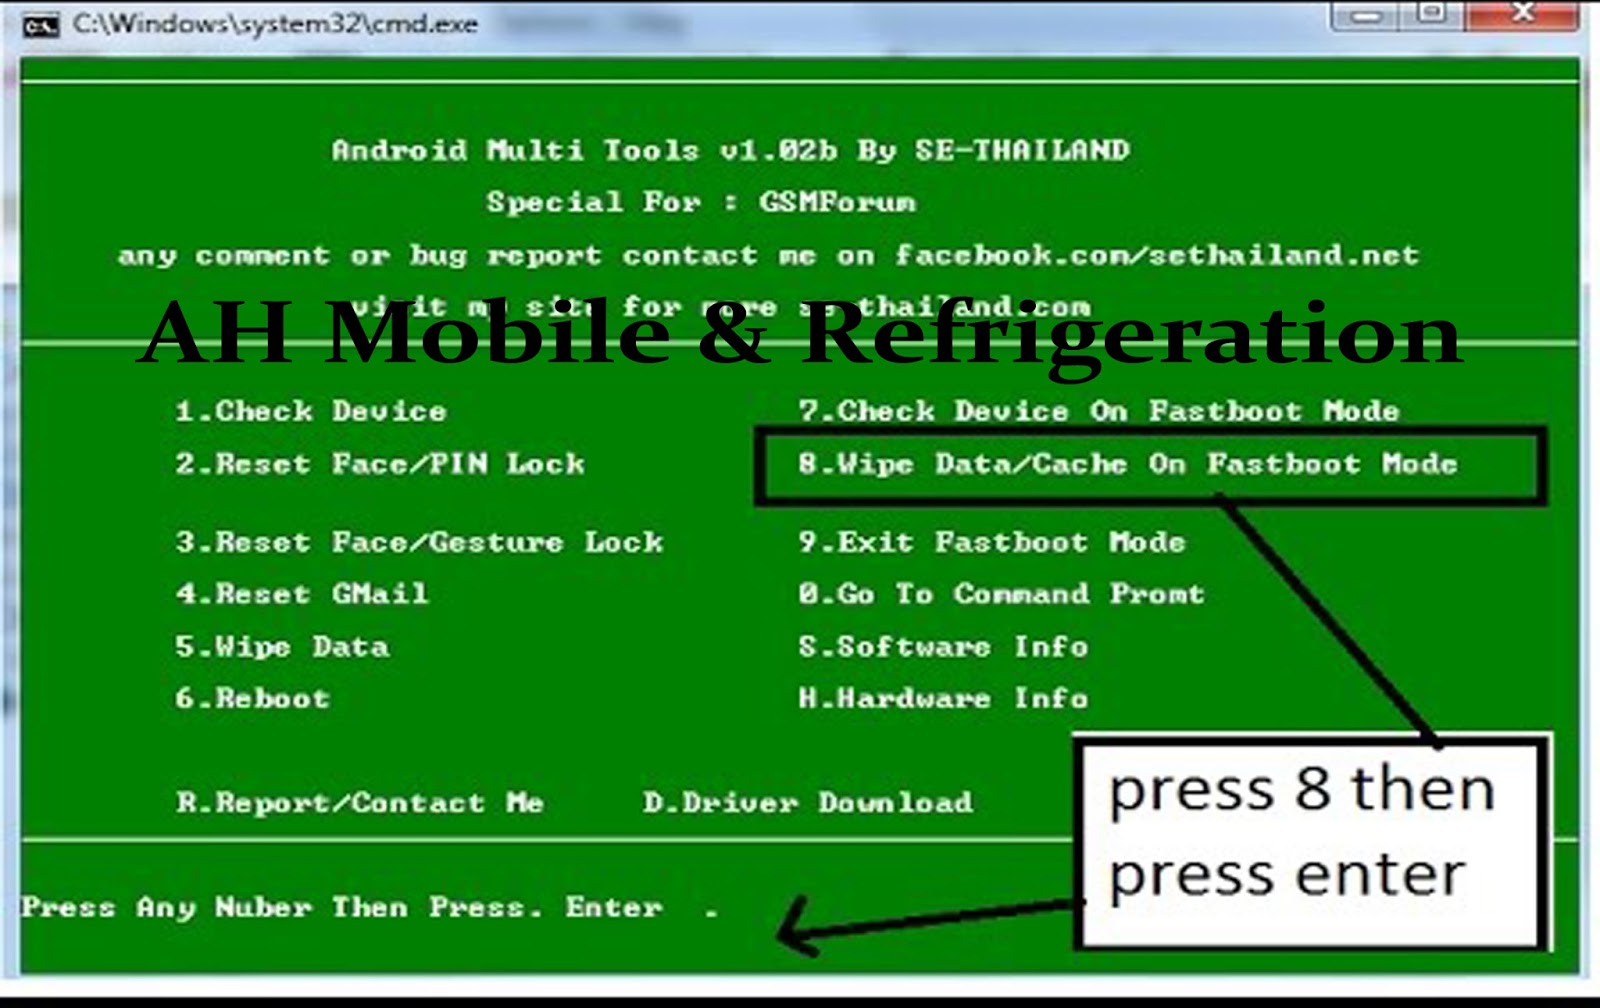 download android multi tools v1.02b for pc